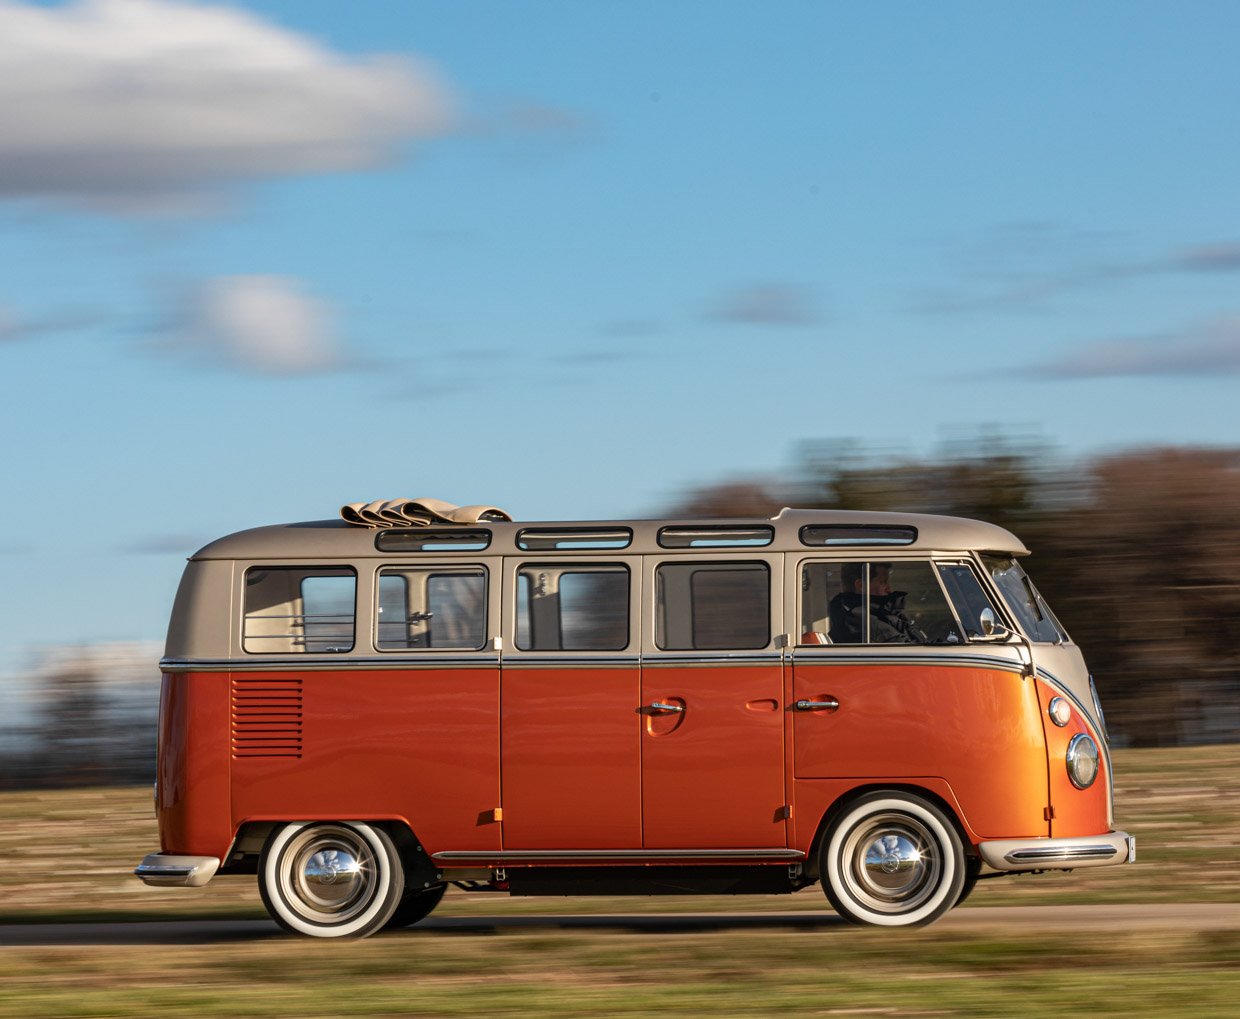 The VW e-Bulli is all kinds of awesome